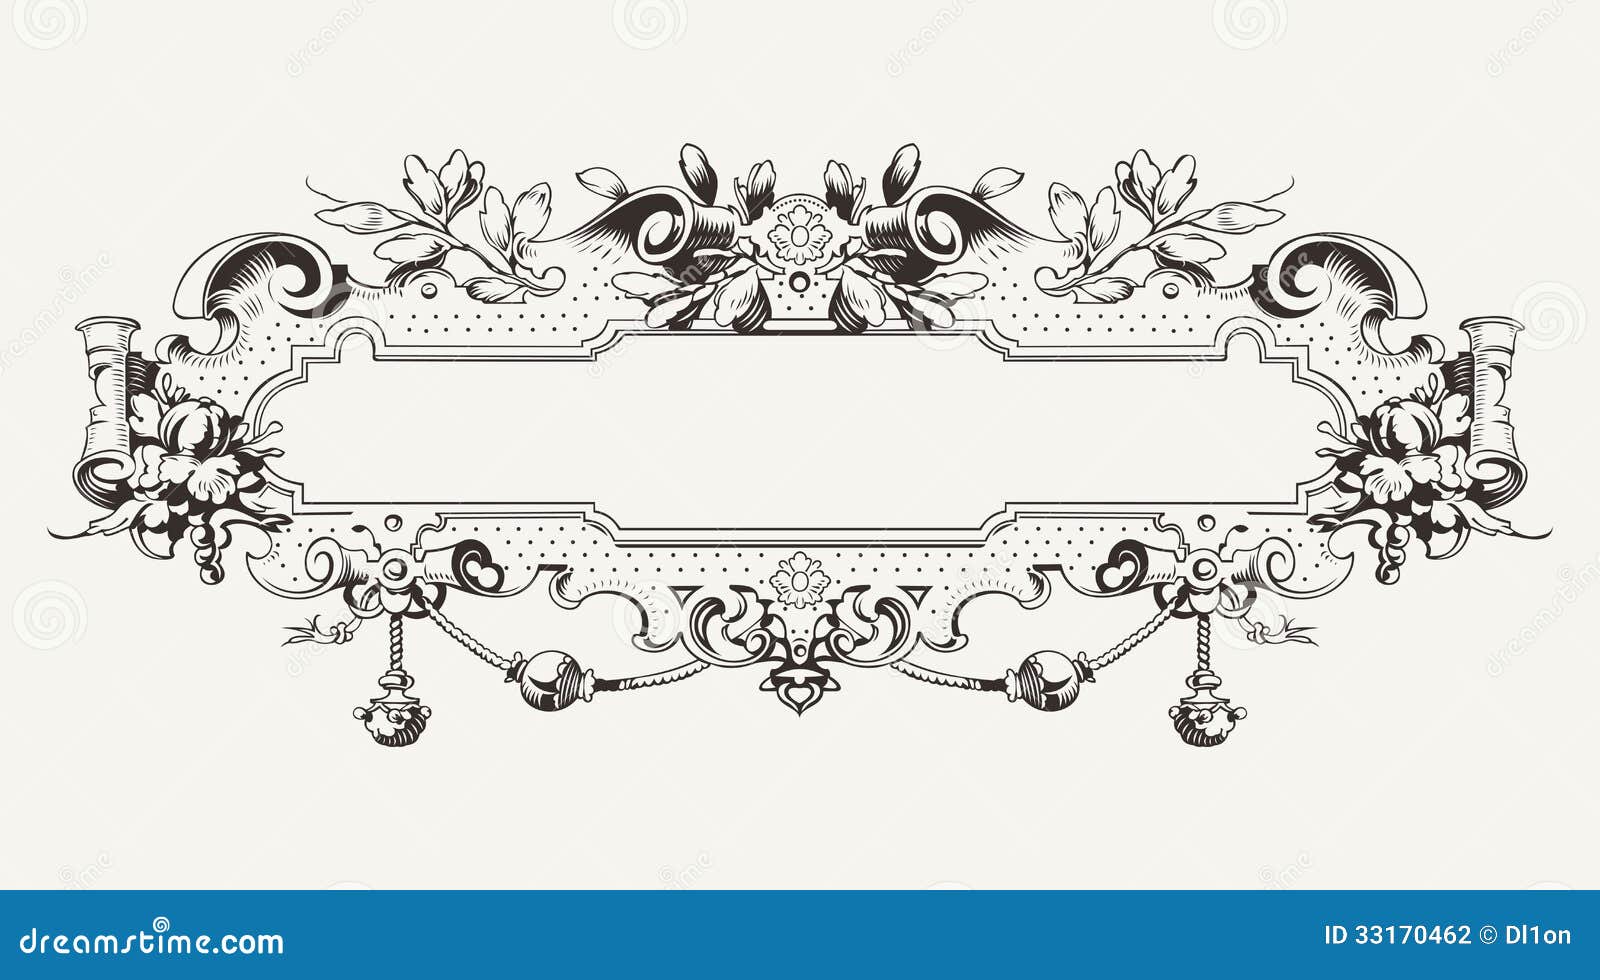 free clipart banner vintage - photo #17